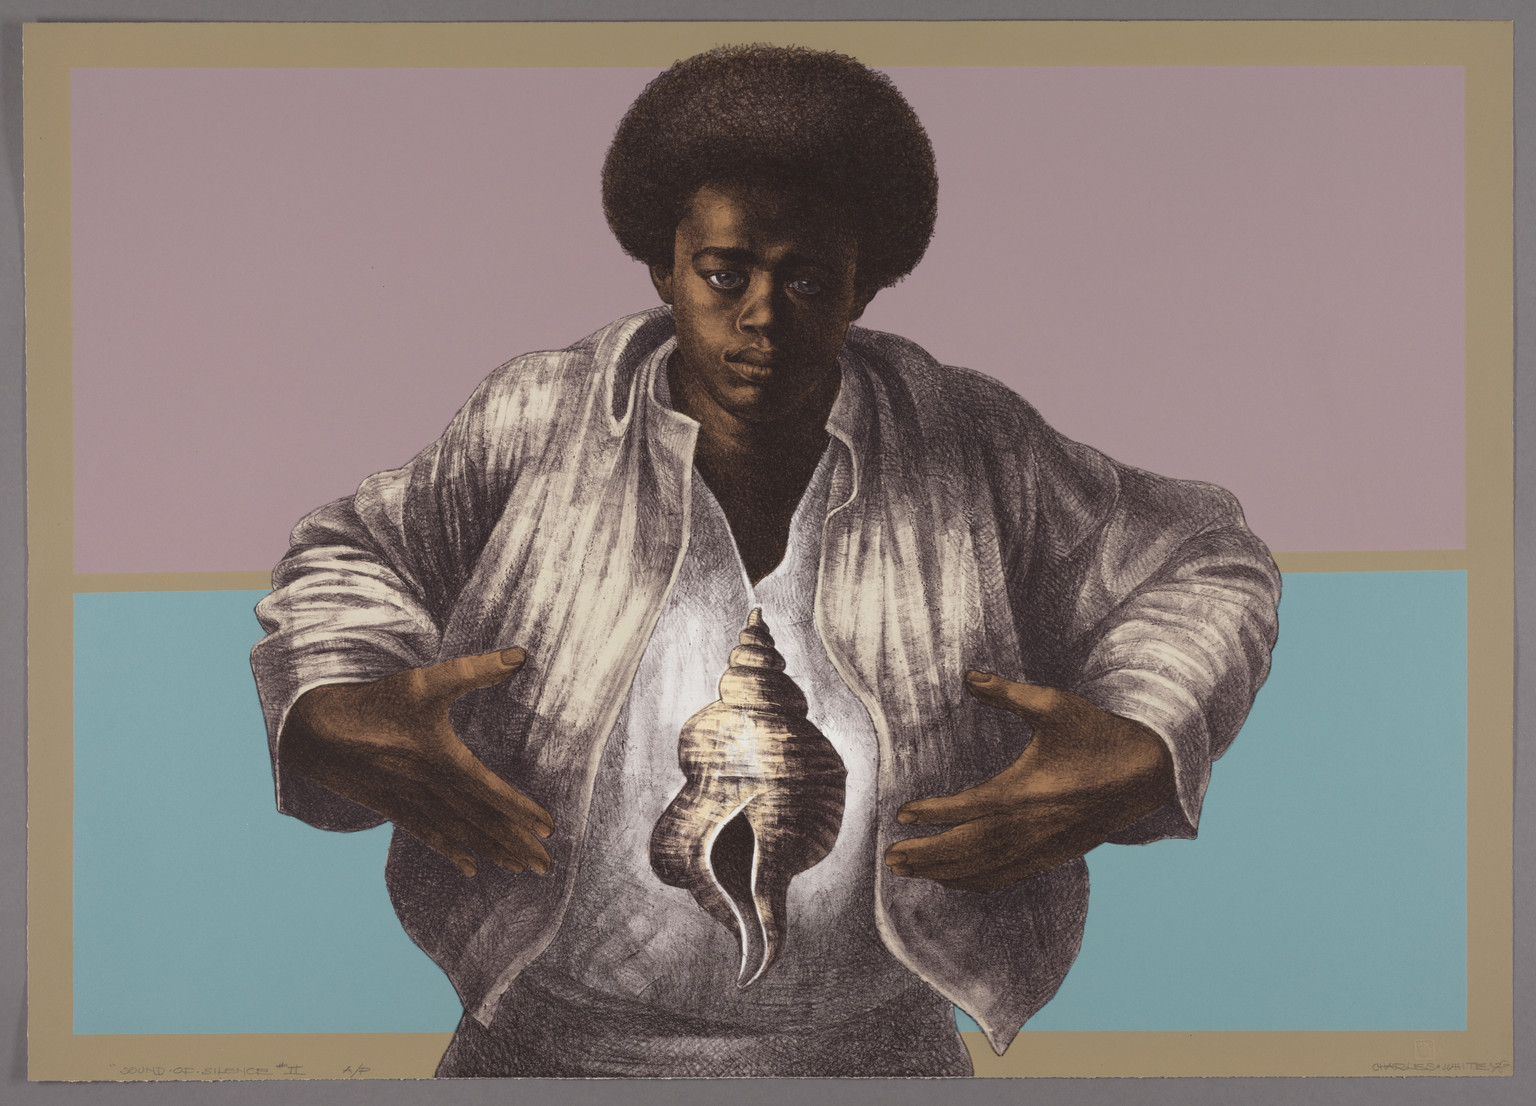 Charles White (American, 1918-1979). Sound of Silence. 1978. Lithograph, 25 1/8 x 35 5/16" (63.8 x 89.7 cm). The Art Institute of Chicago, Margaret Fisher Fund. © The Charles White Archives/ © The Art Institute of Chicago